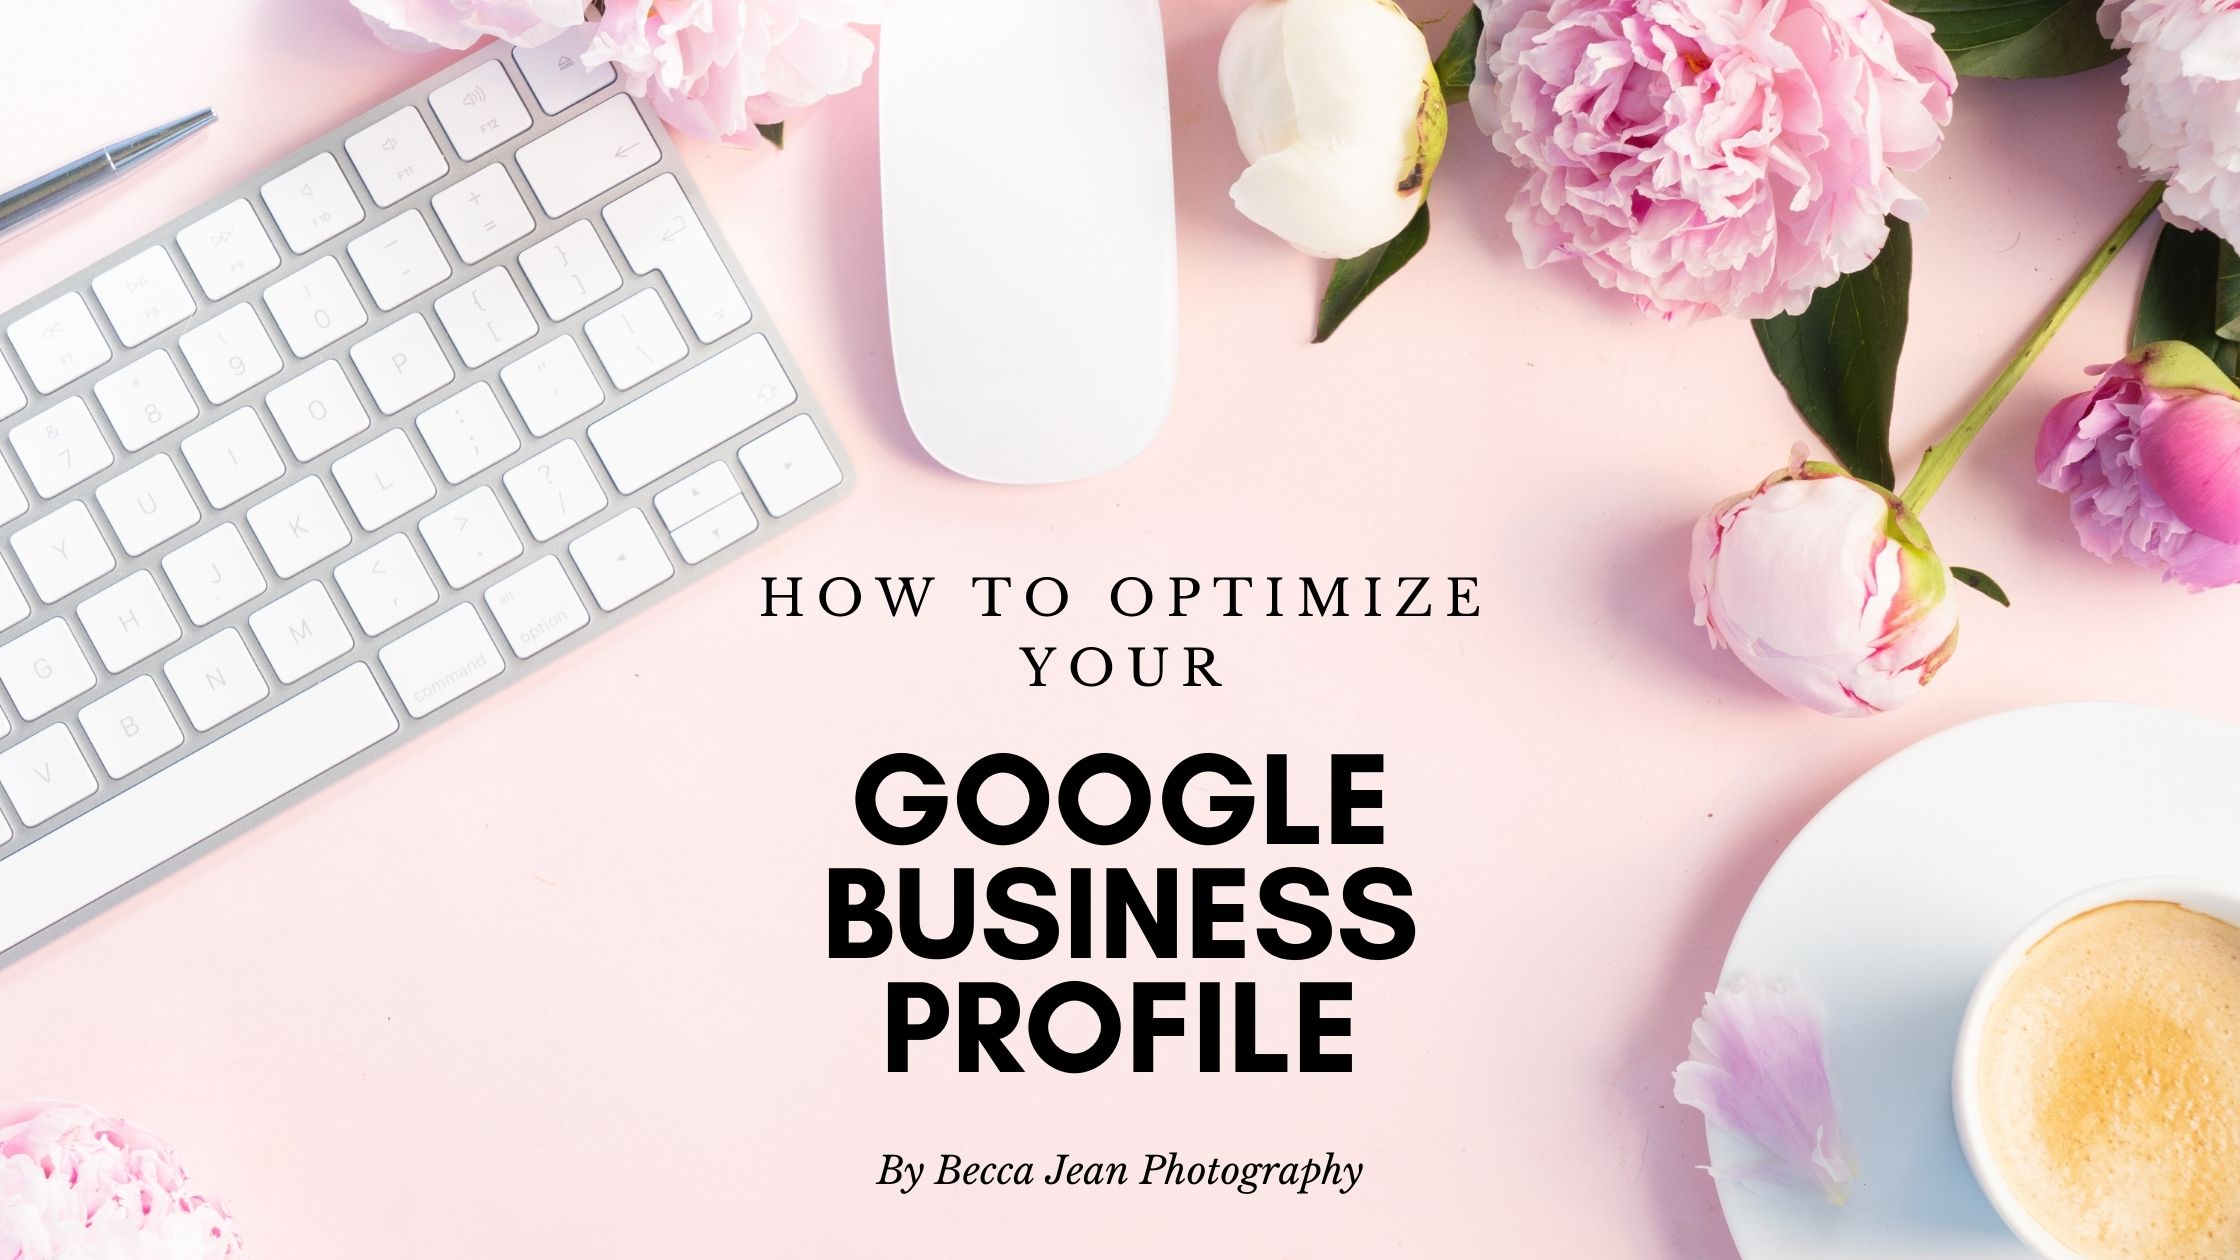 How to optimize your google business profile - tips for photographers